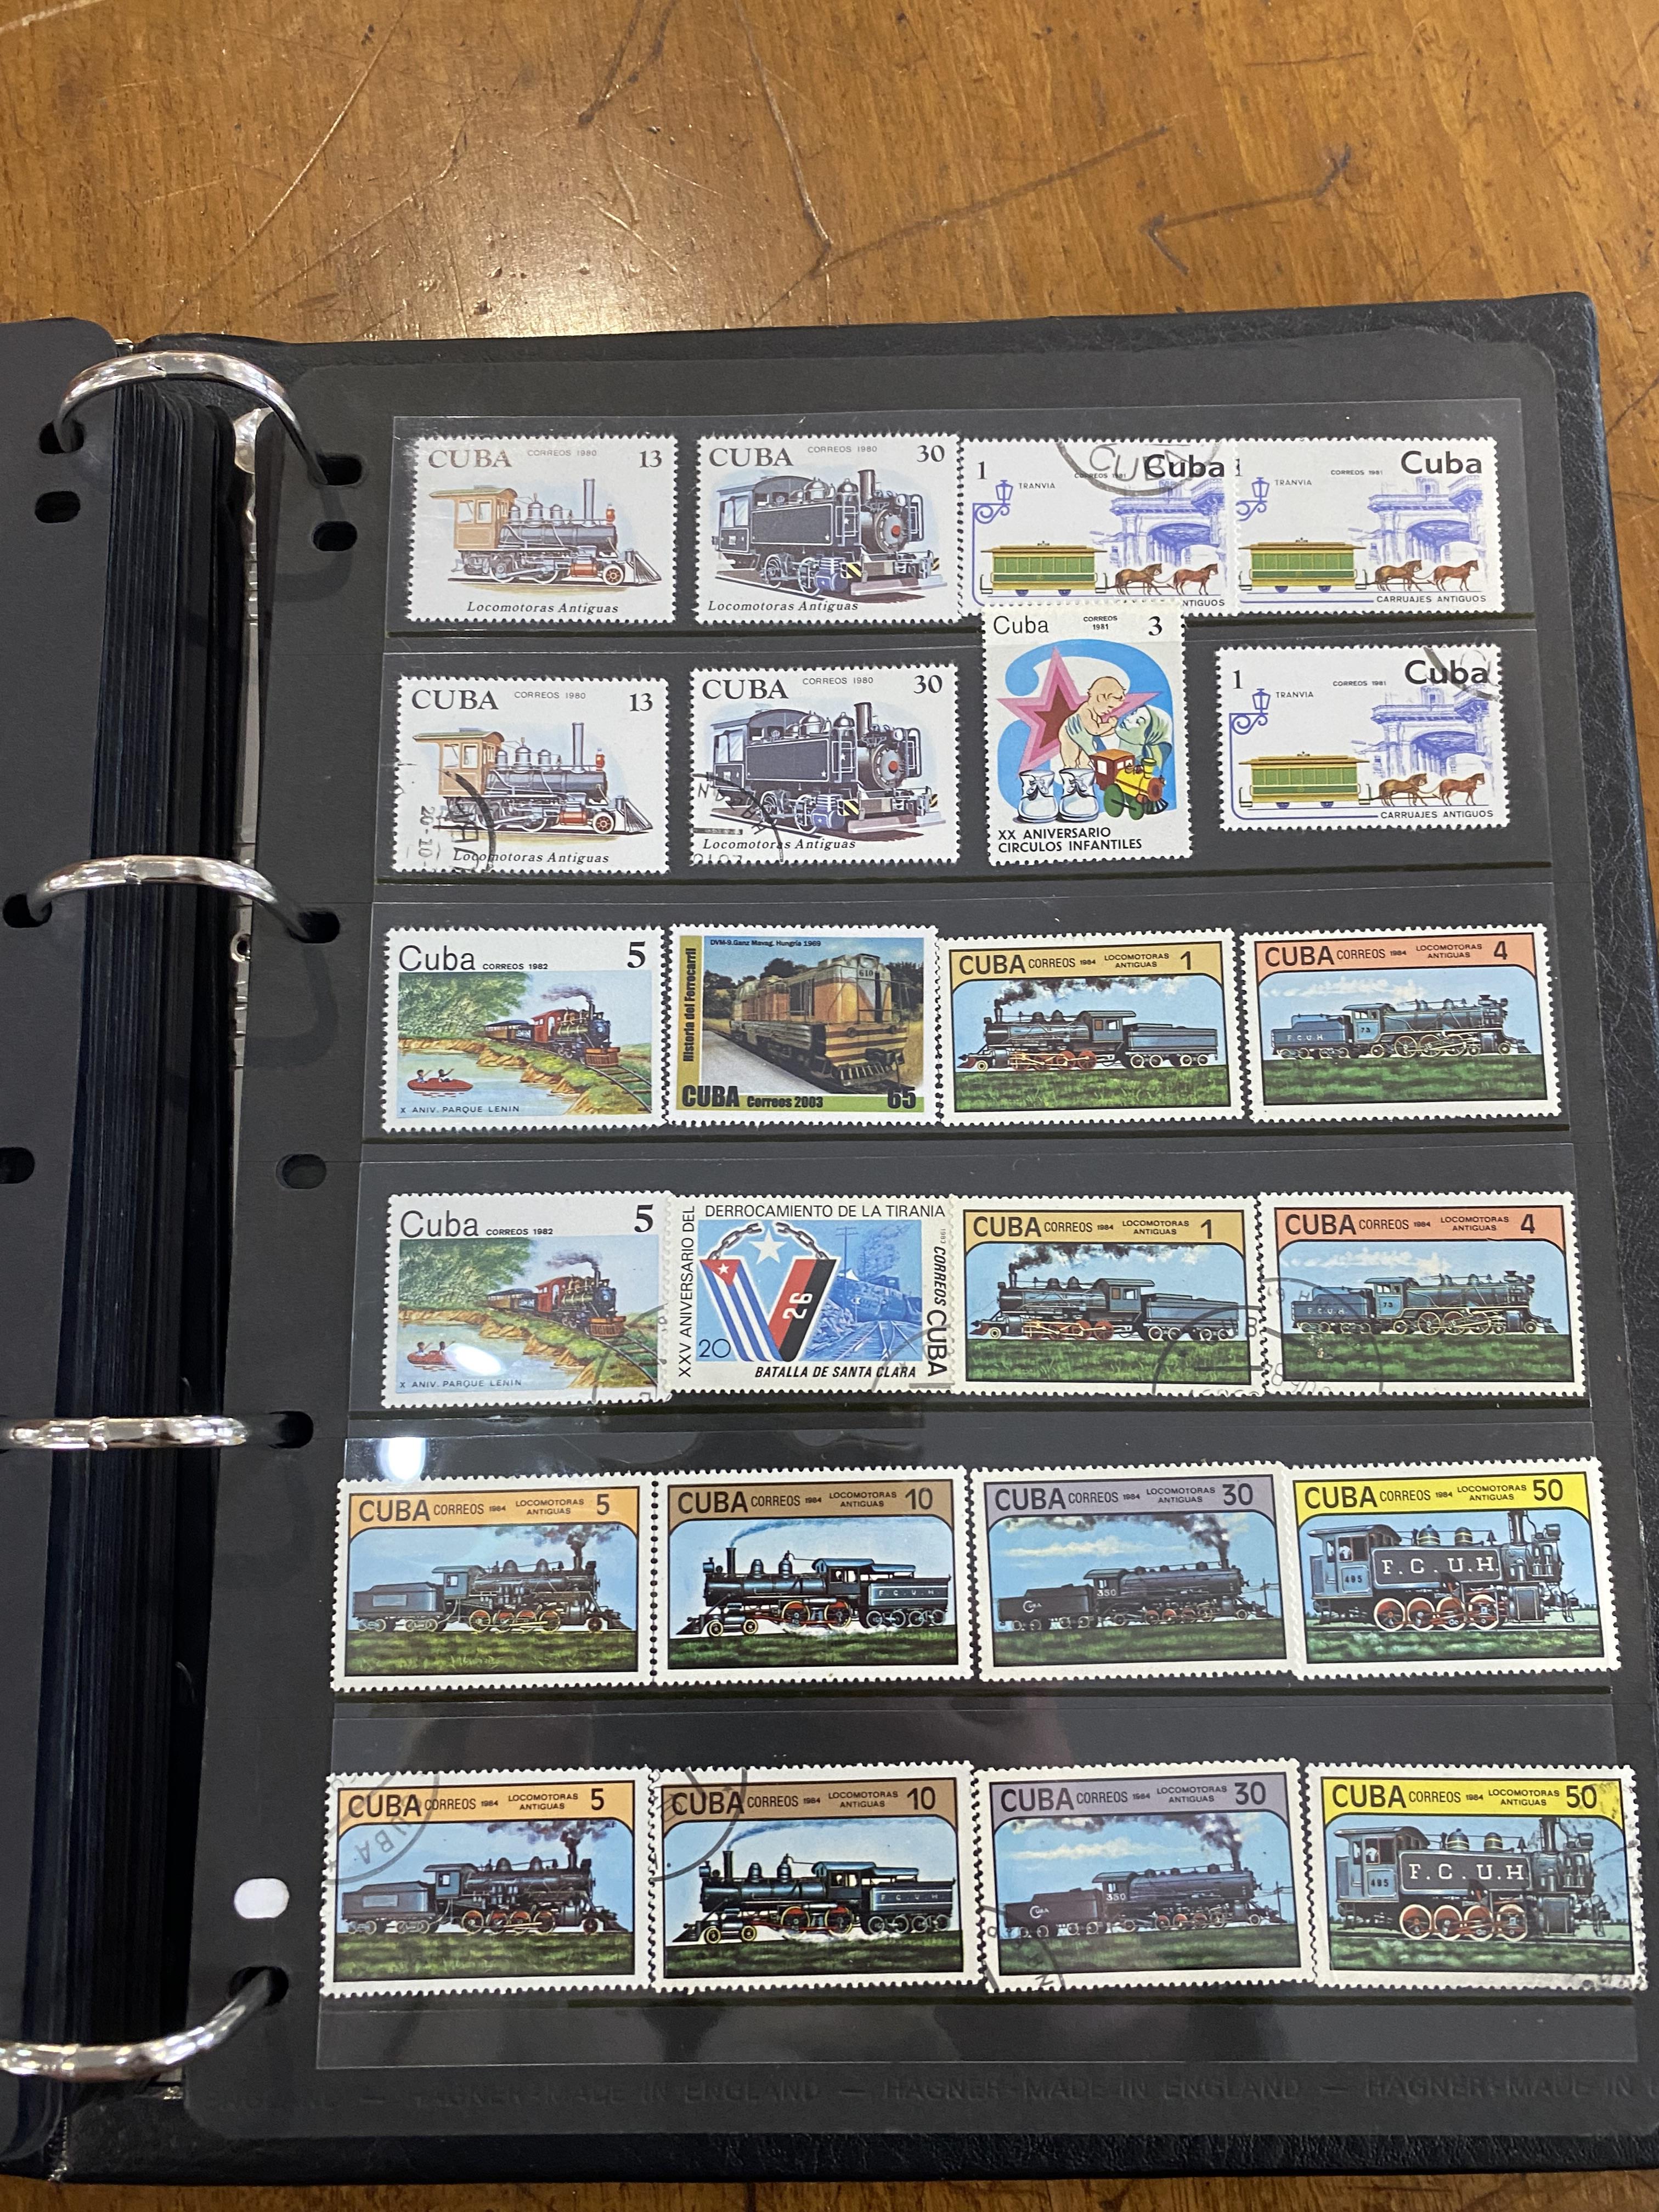 Stamp Interest - Meaty Album of Mostly Mint and railway oriented stamps from around the world. - Image 6 of 8